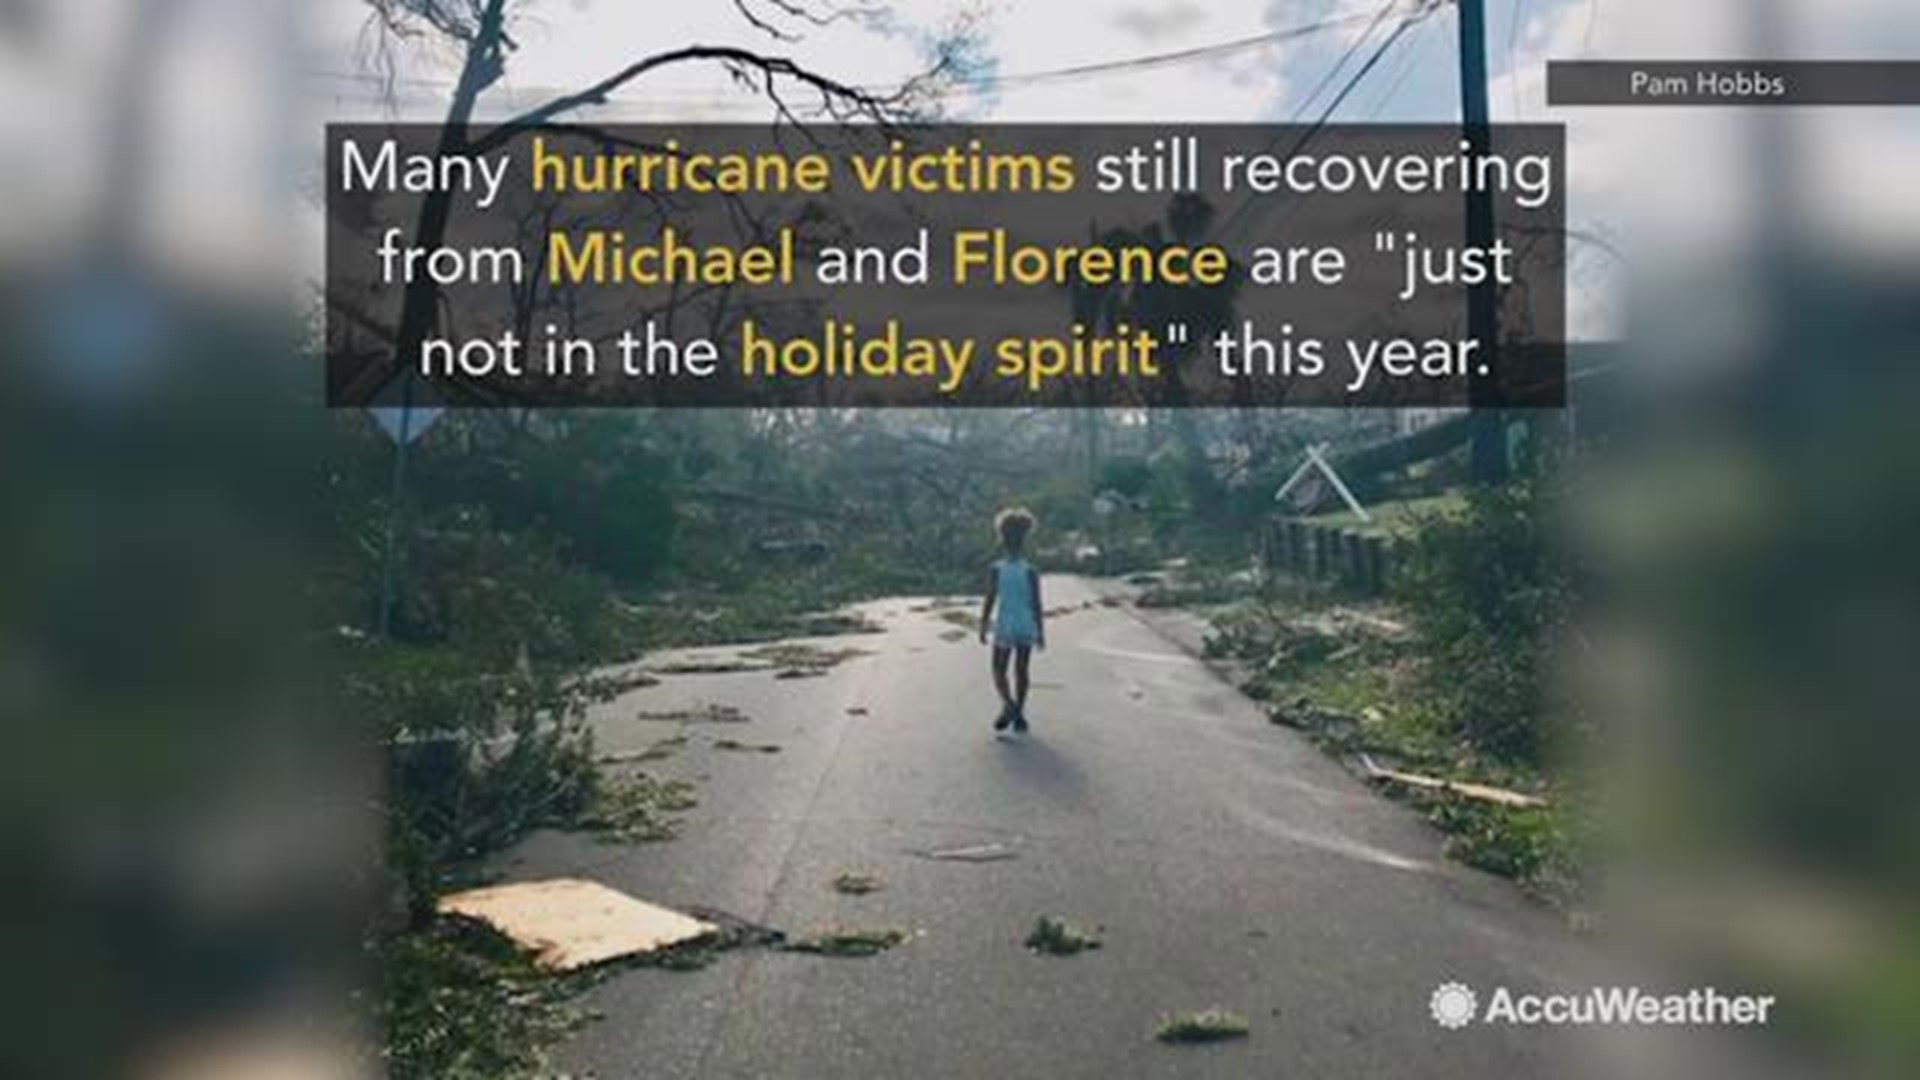 People who are still navigating the aftermath of Michael and Florence have had to deal with drastic changes in their holiday plans this year.